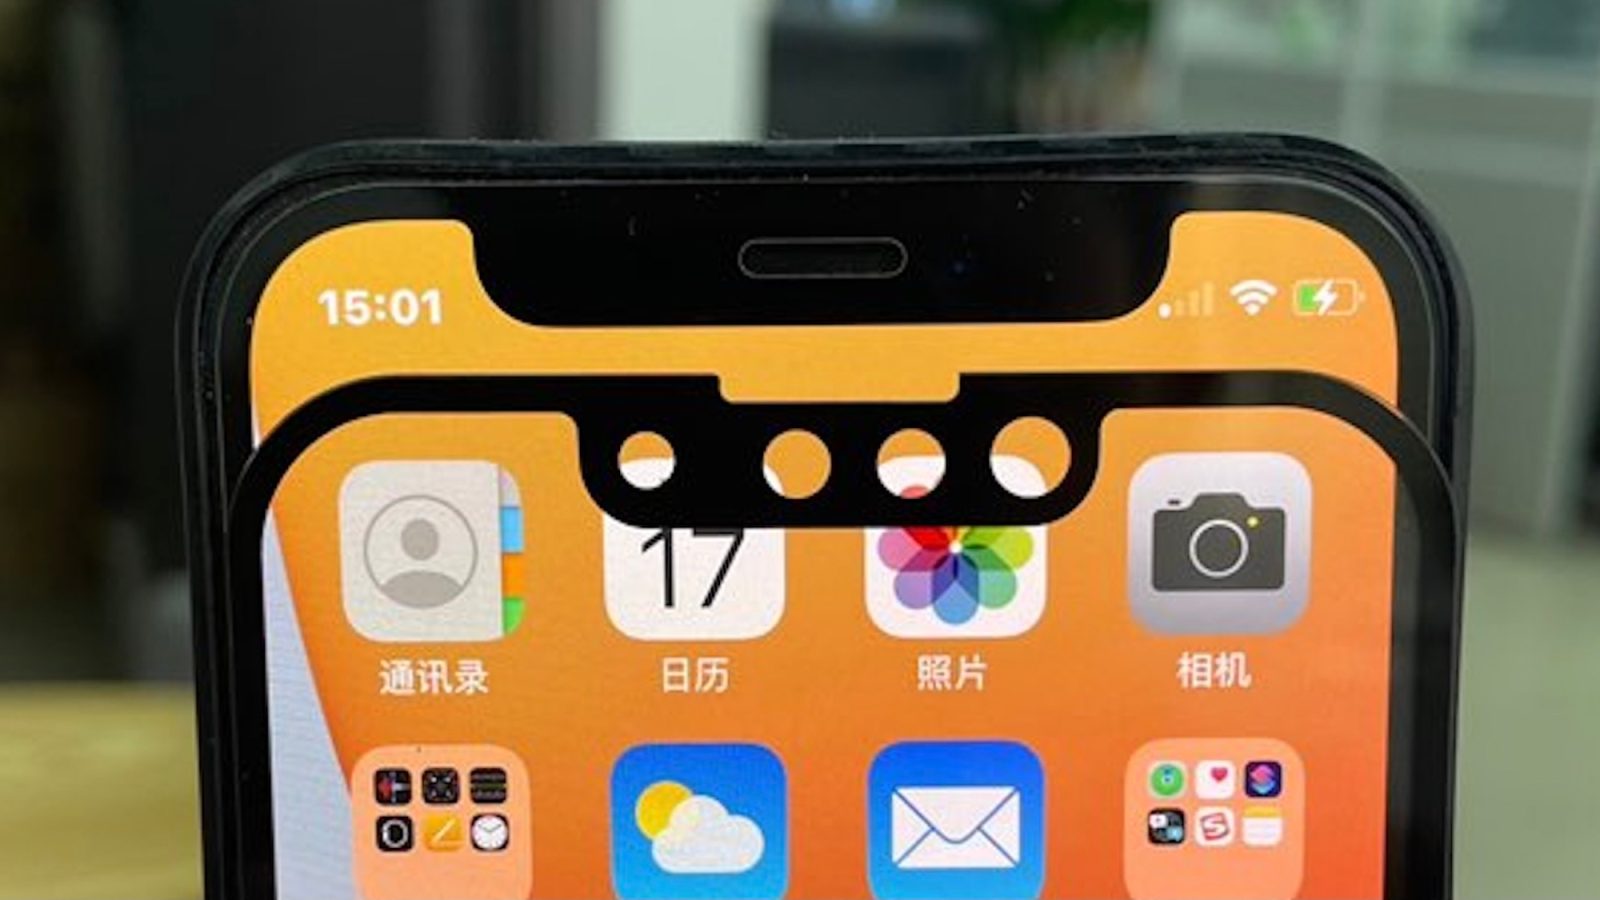 New Photos Claim To Show Smaller Iphone 13 Notch Compared To Iphone 12 9to5mac